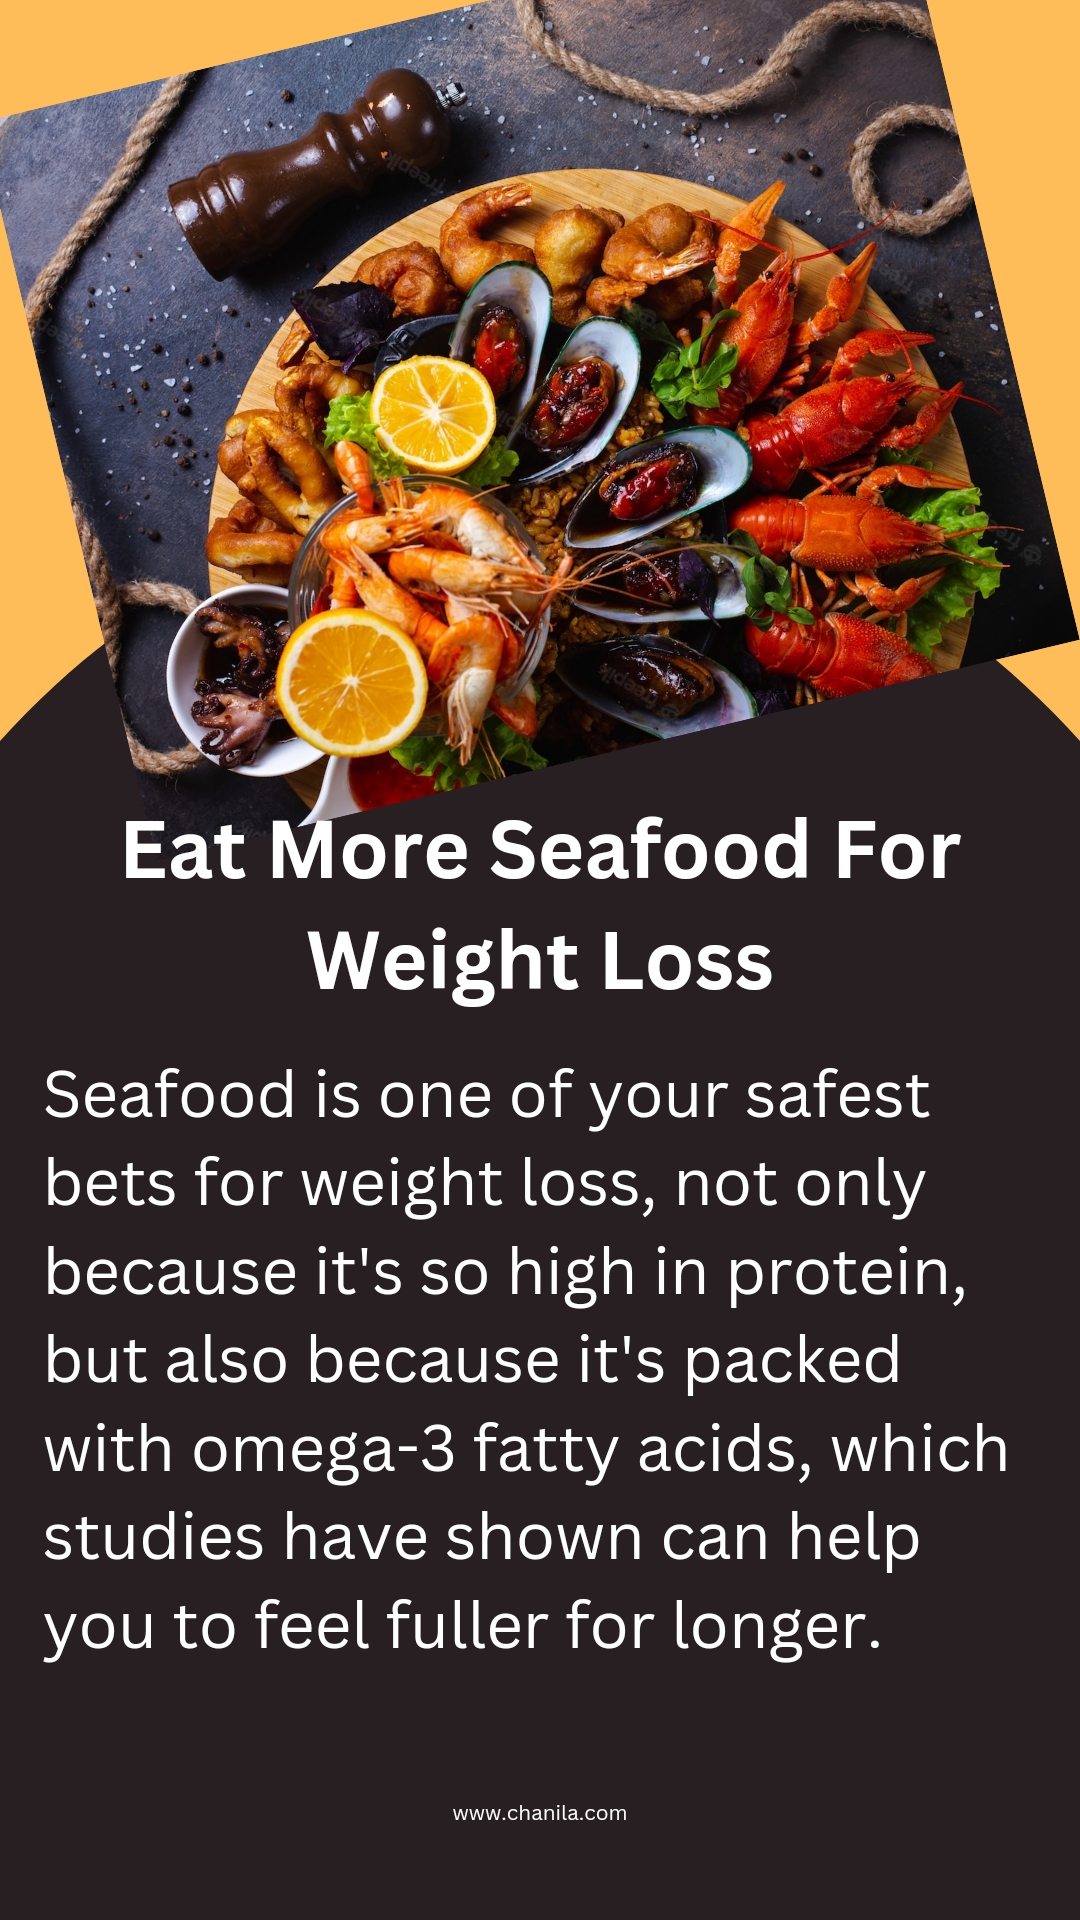 Eat More Seafood For Weight Loss